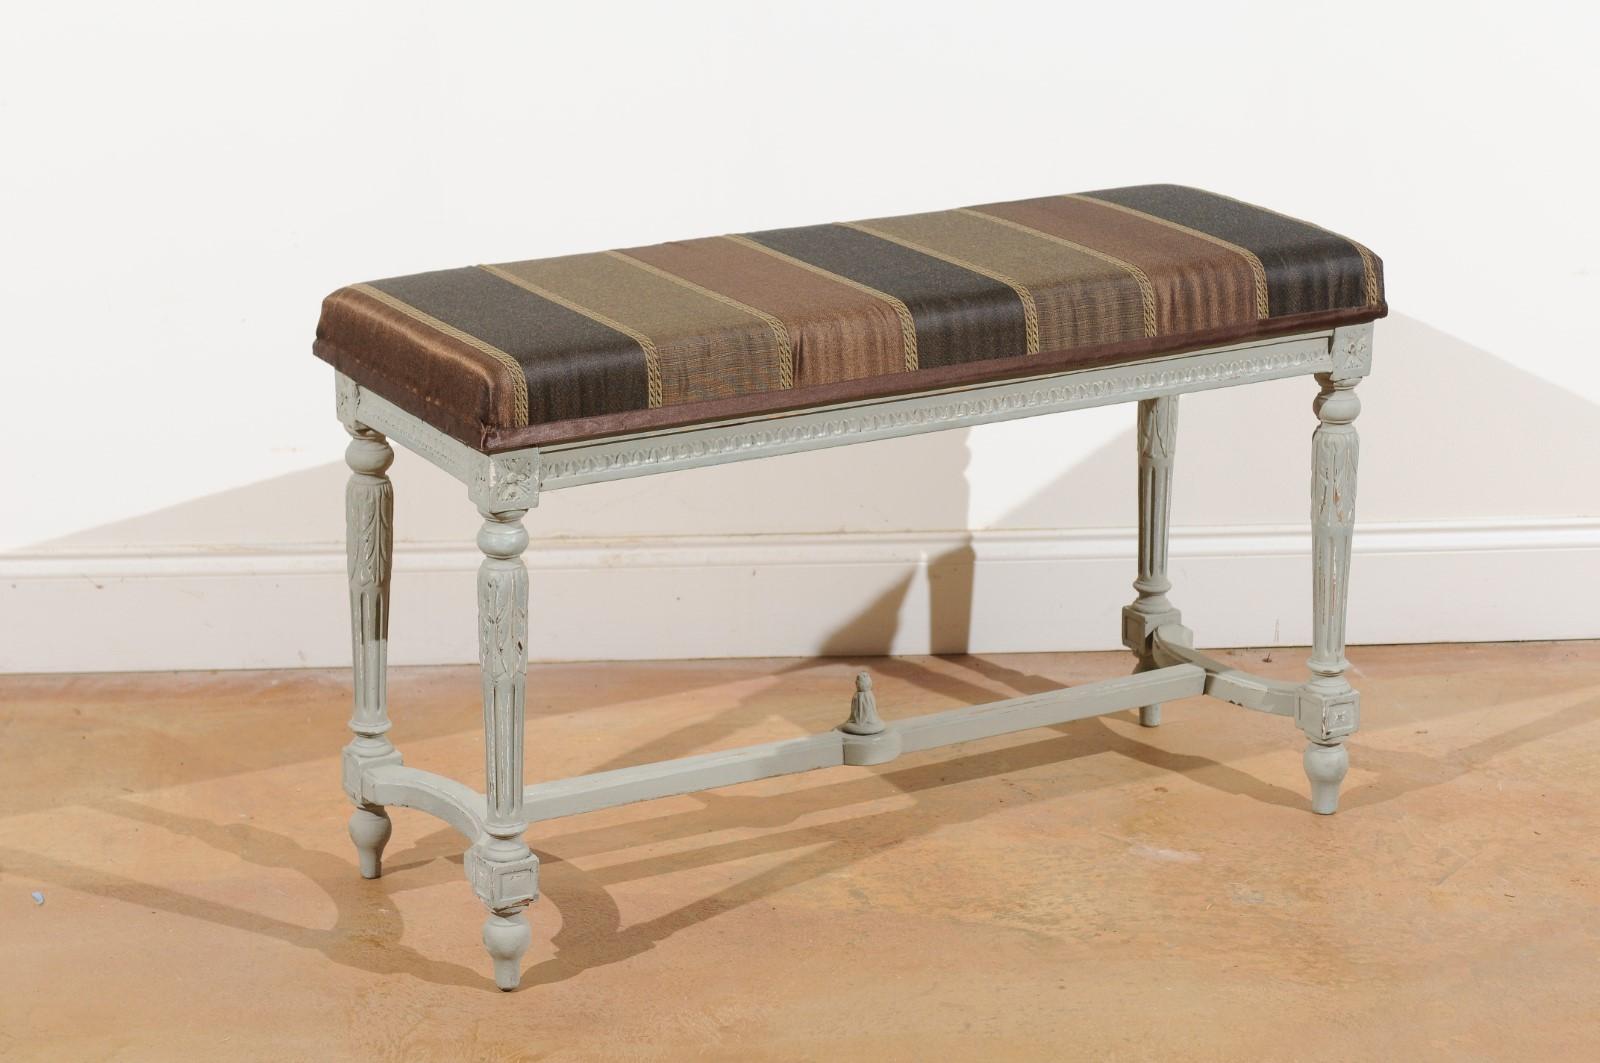 A French Louis XVI style two-seat painted piano bench from the early 20th century, with new upholstered top, fluted legs and cross stretcher. This French piano bench features a rectangular seat, upholstered with an exquisite brown and black fabric,